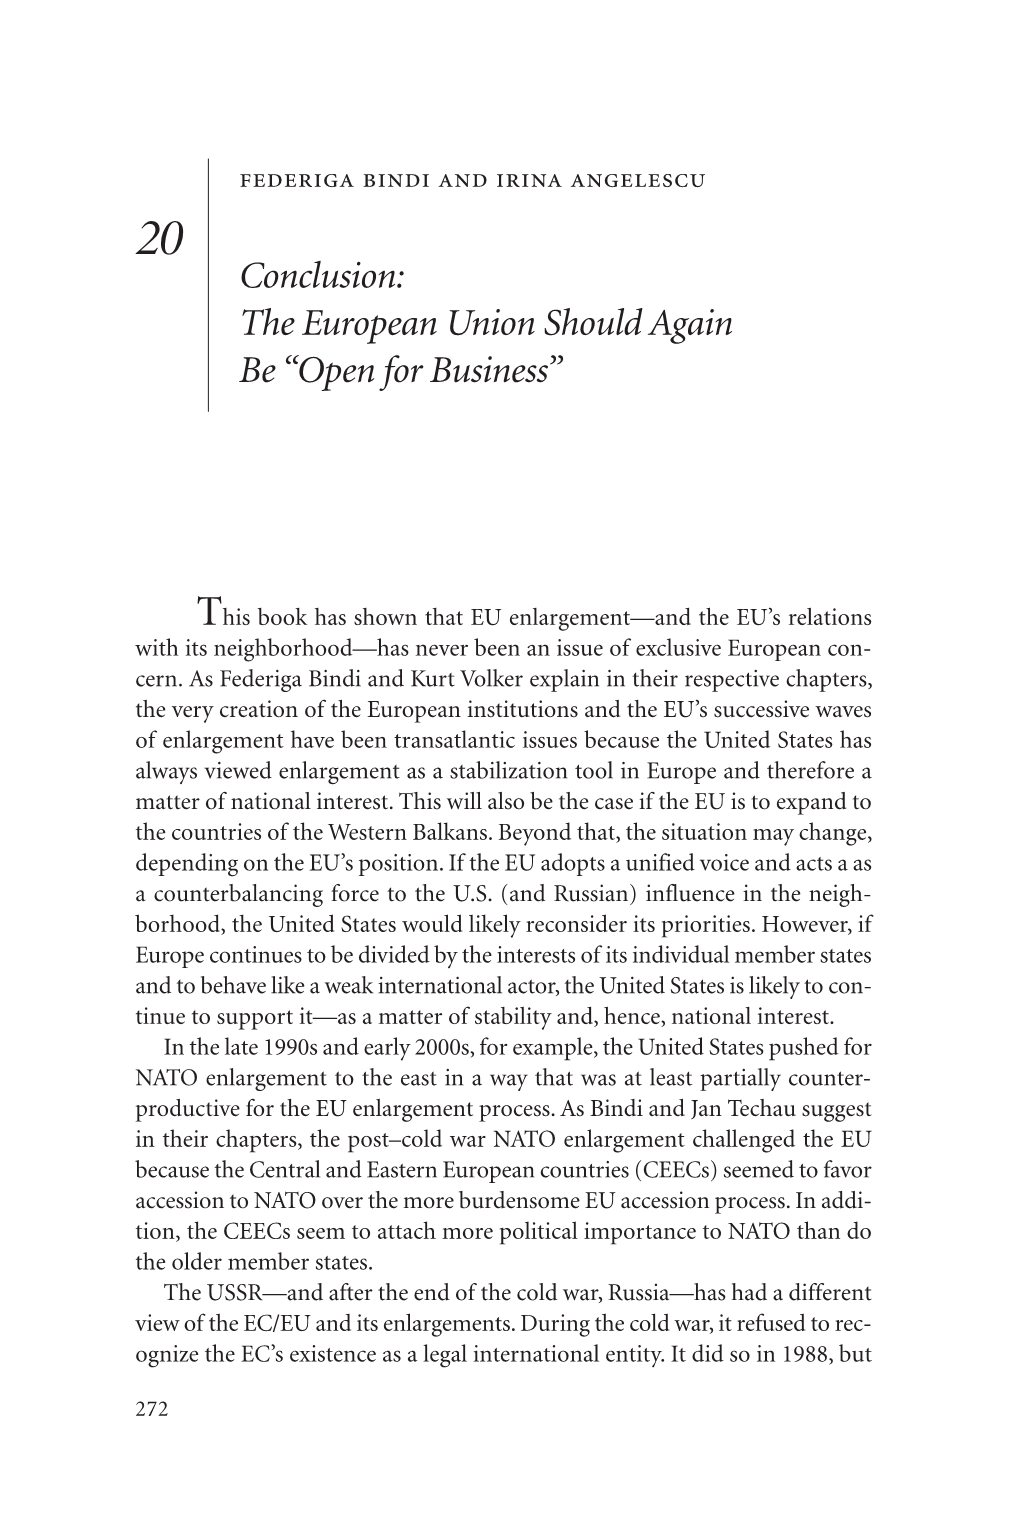 Conclusion: the European Union Should Again Be “Open for Business”